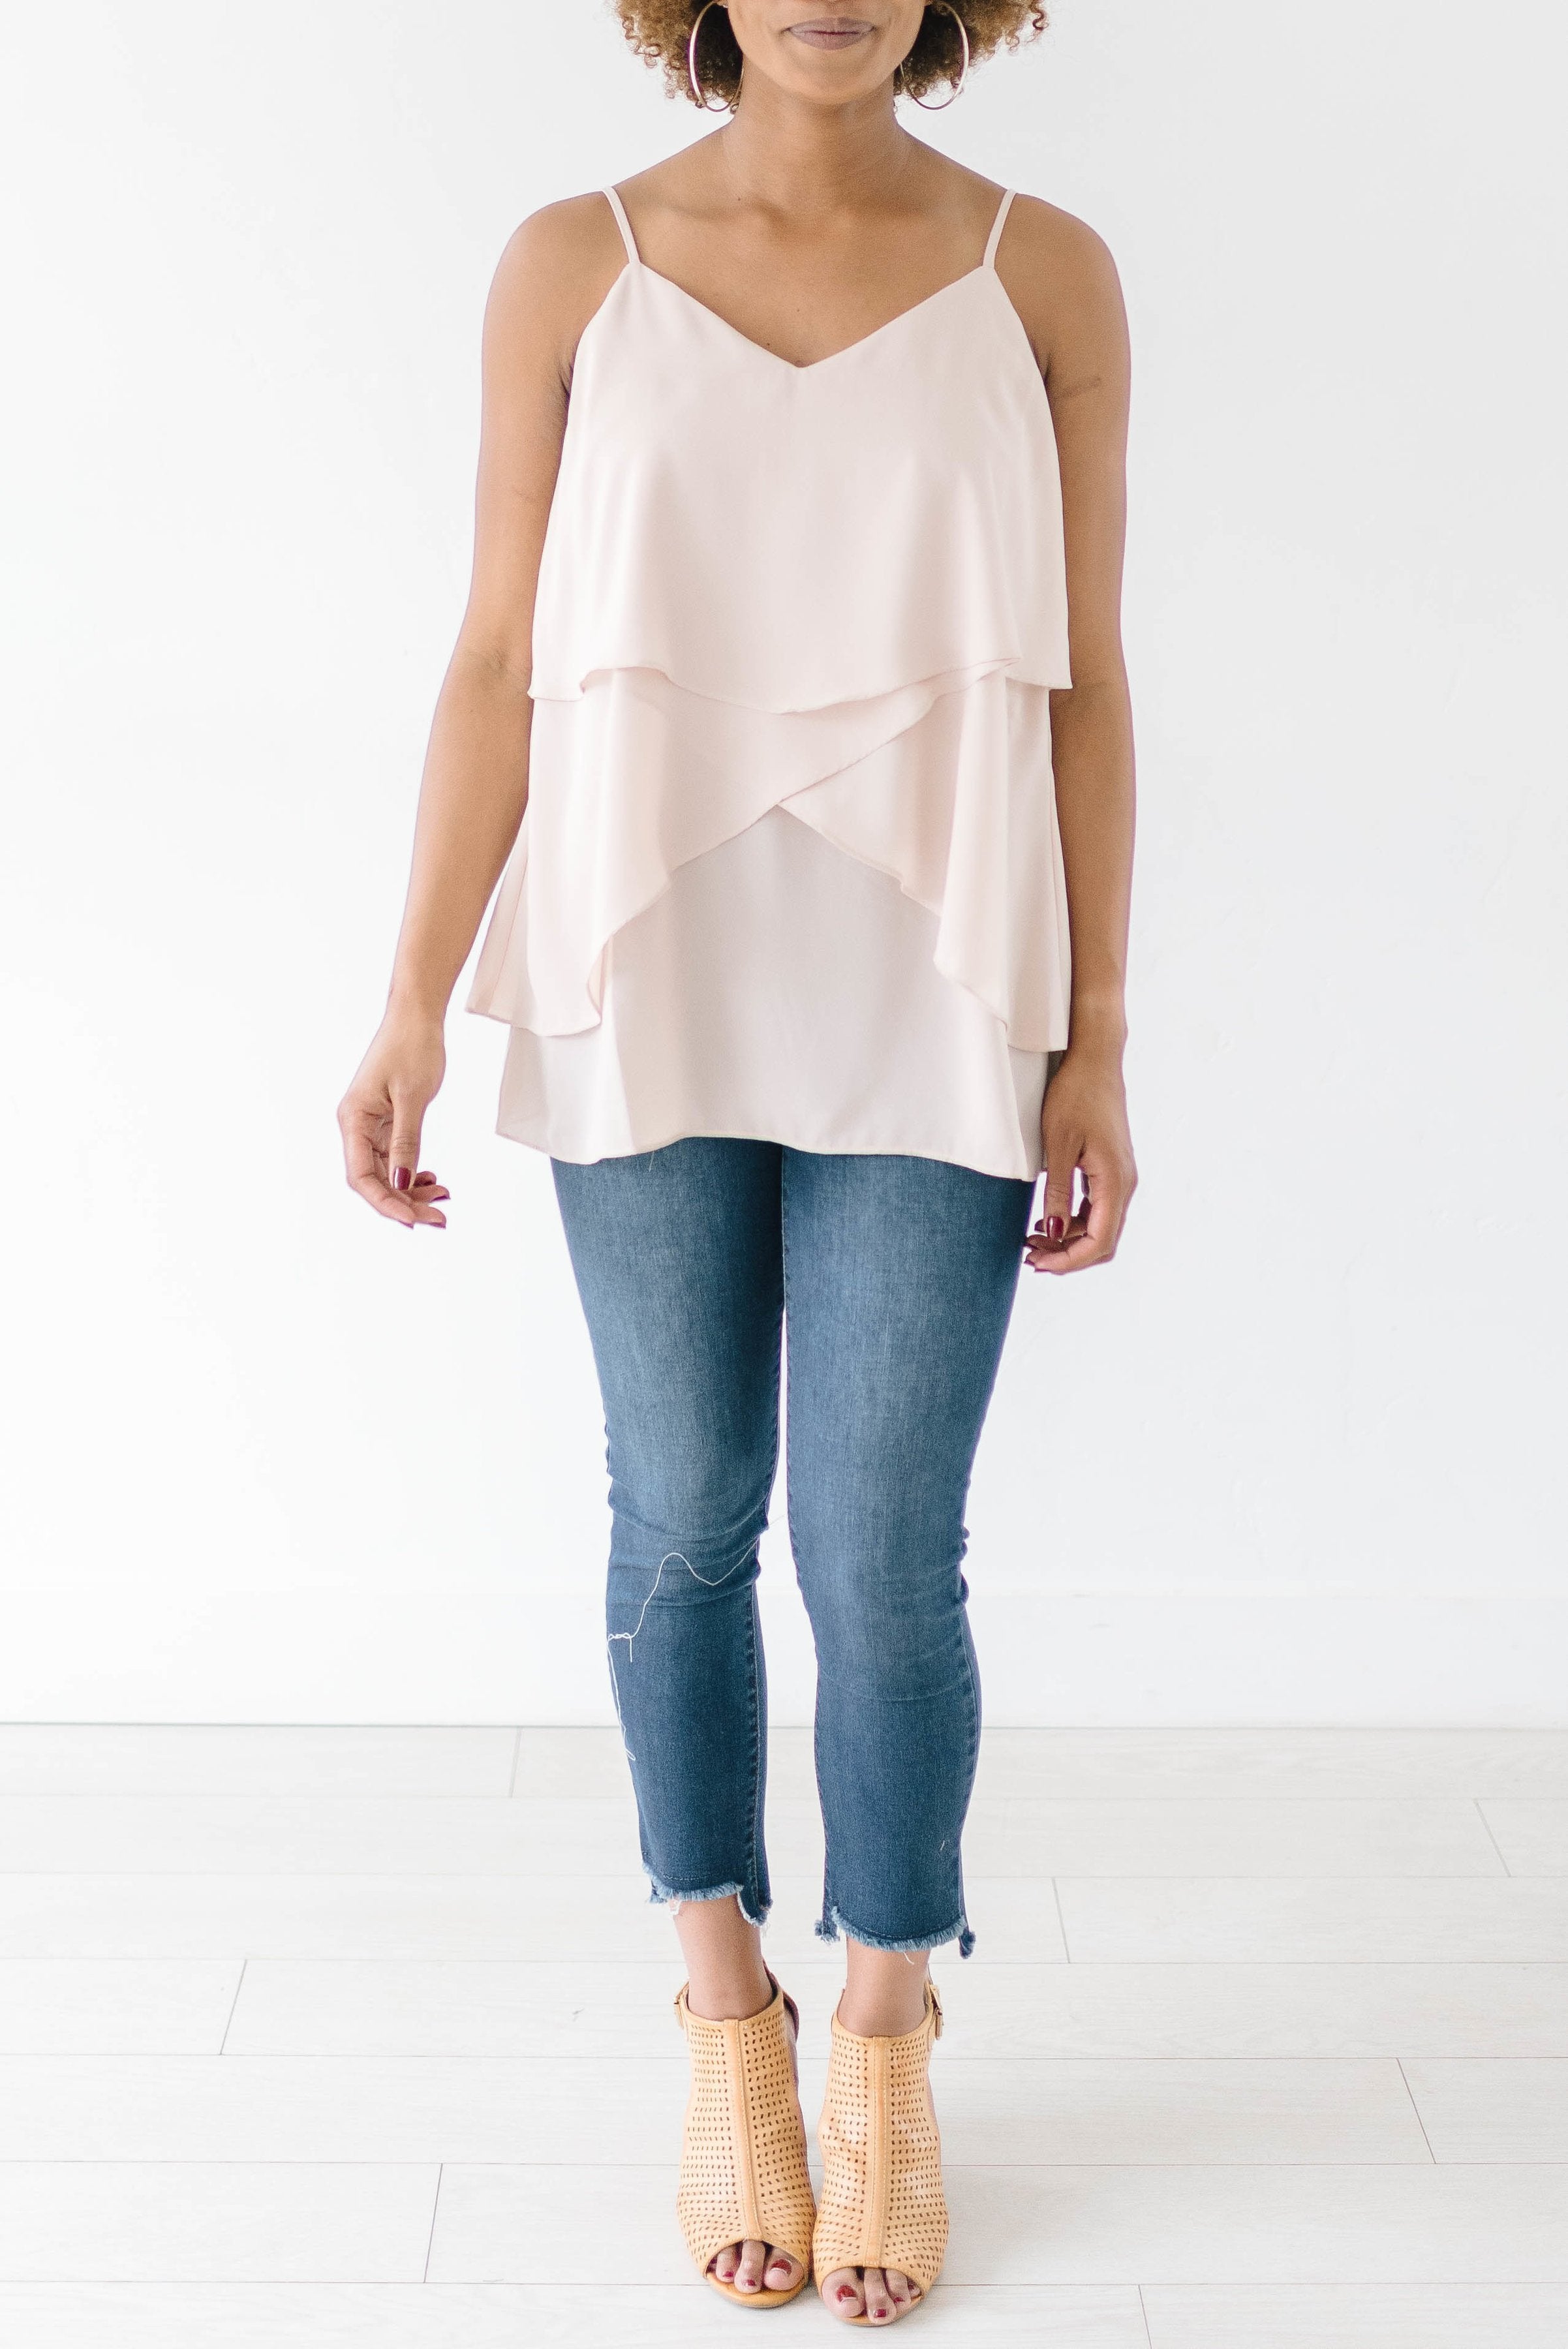 Lovely Layers Tank in Taupe